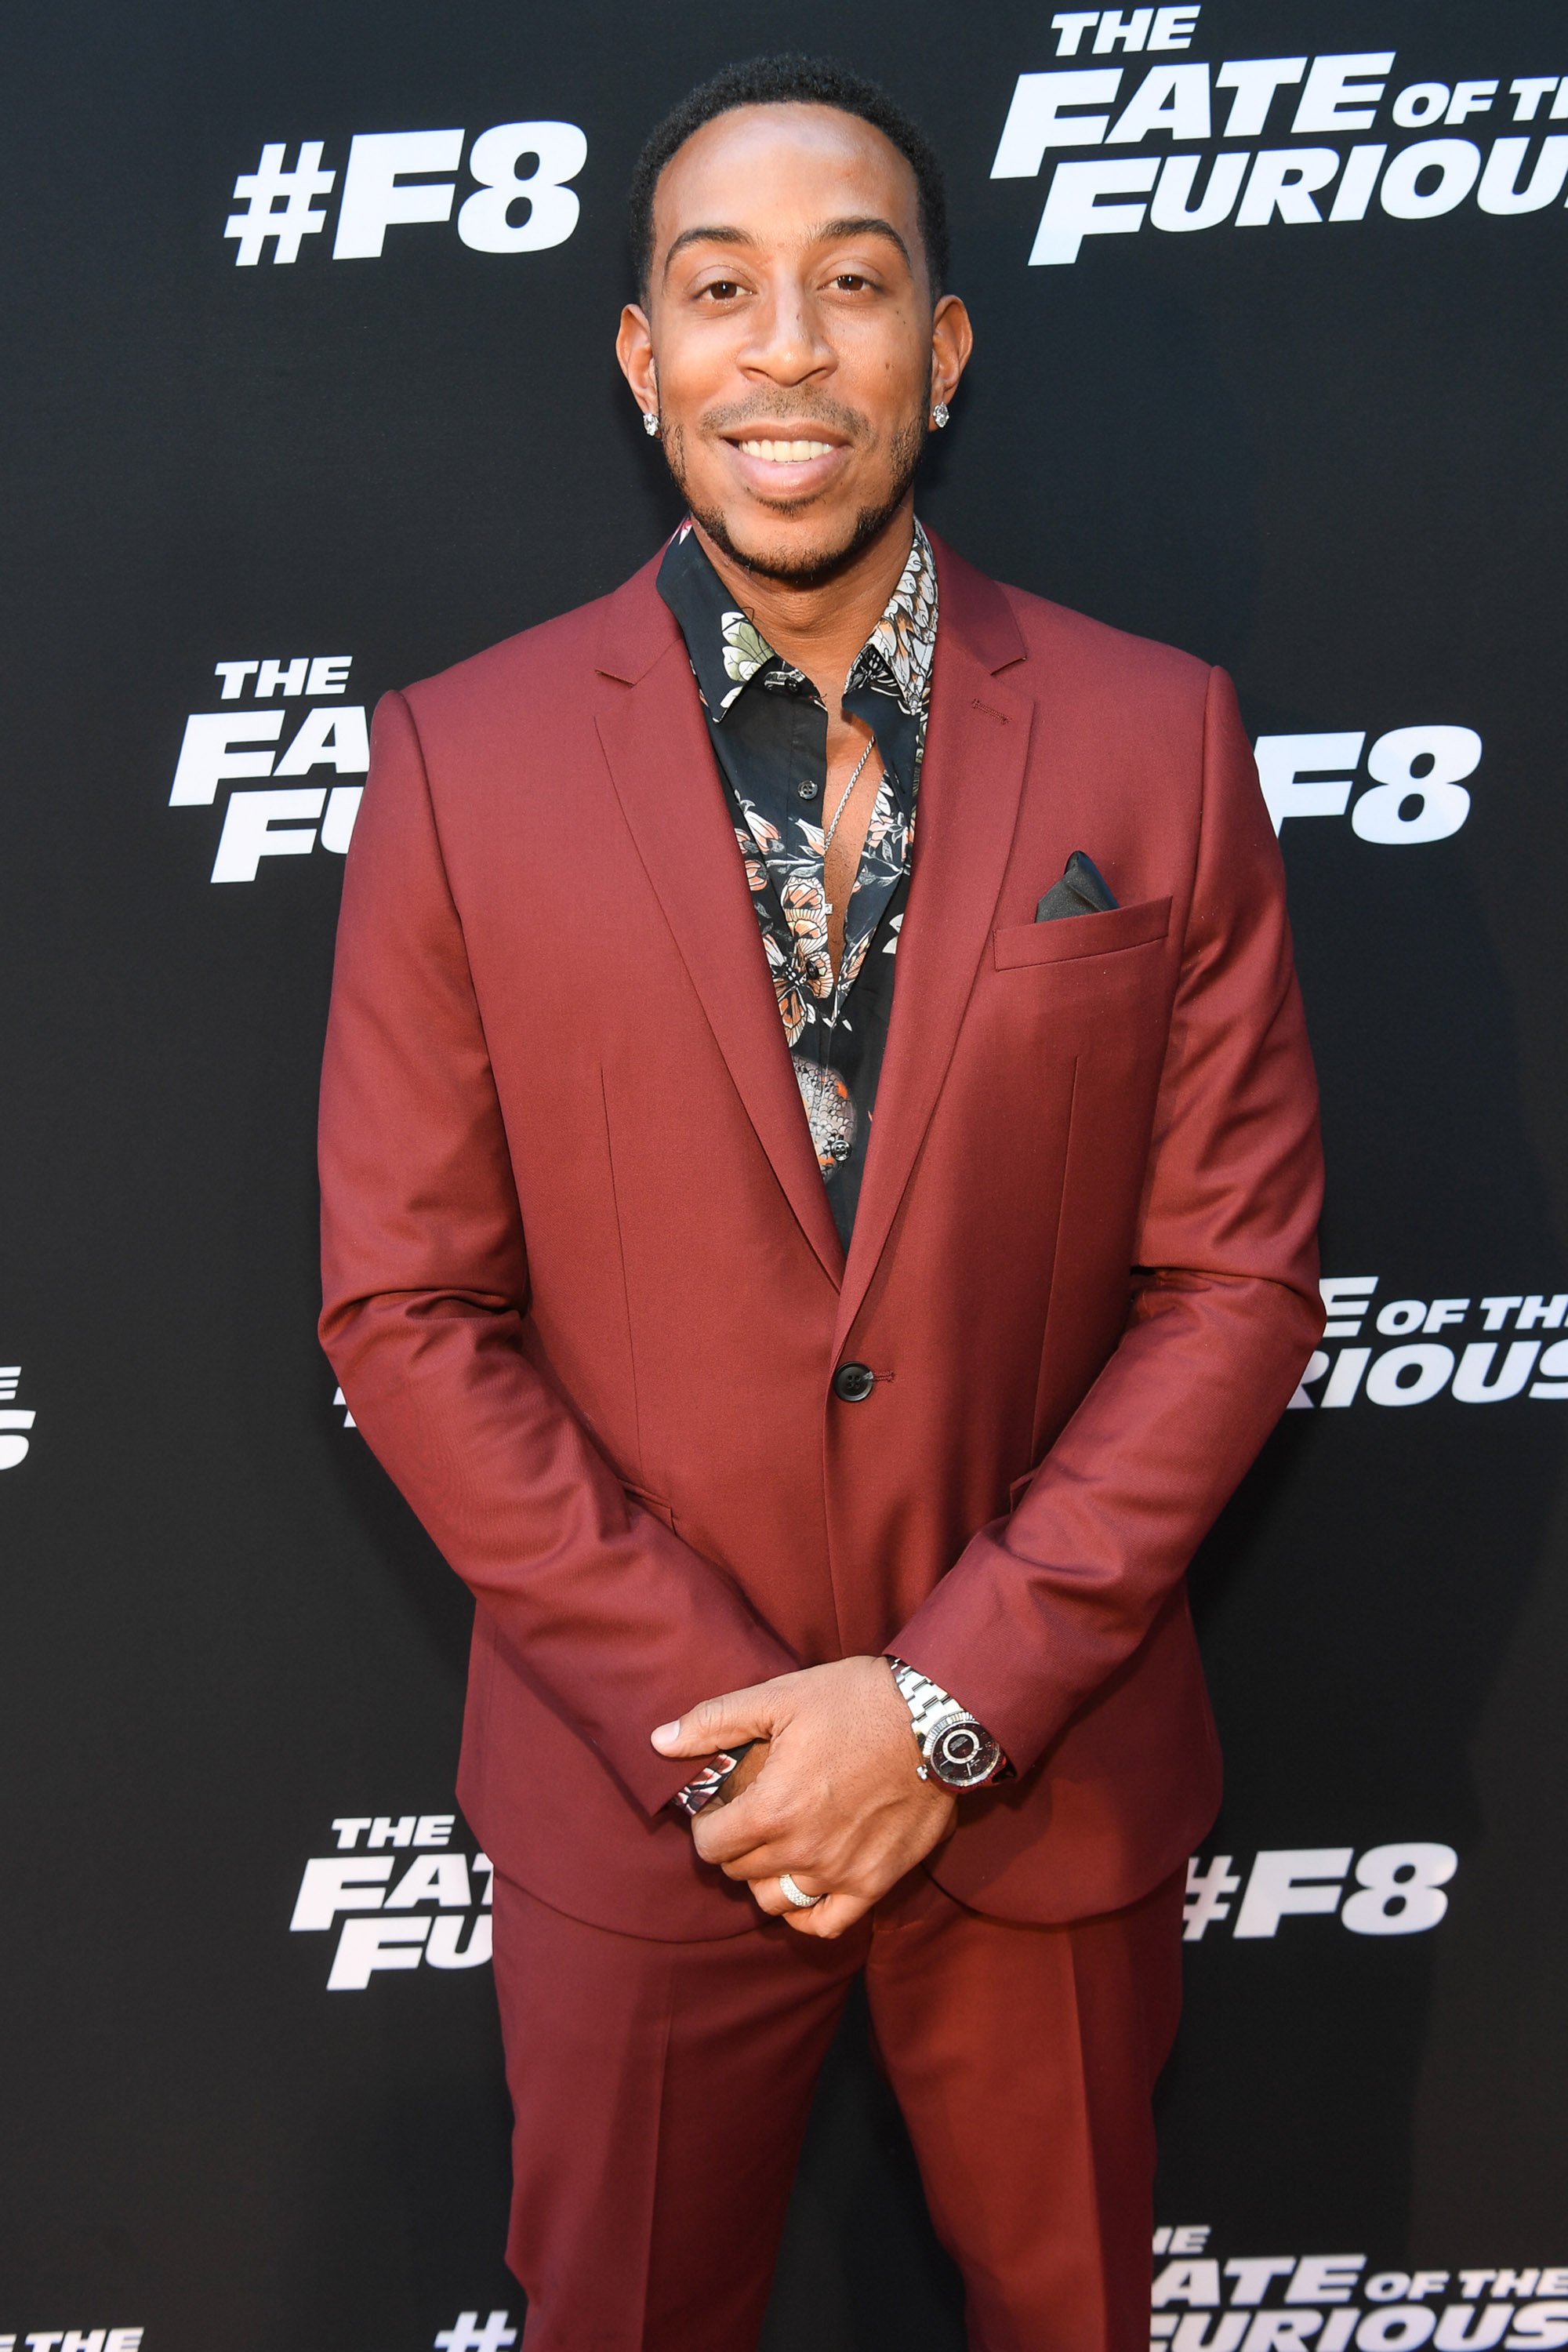 Ludacris attends "The Fate of the Furious" Atlanta red carpet screening at SCADshow on April 4, 2017 in Atlanta. | Photo: Getty Images